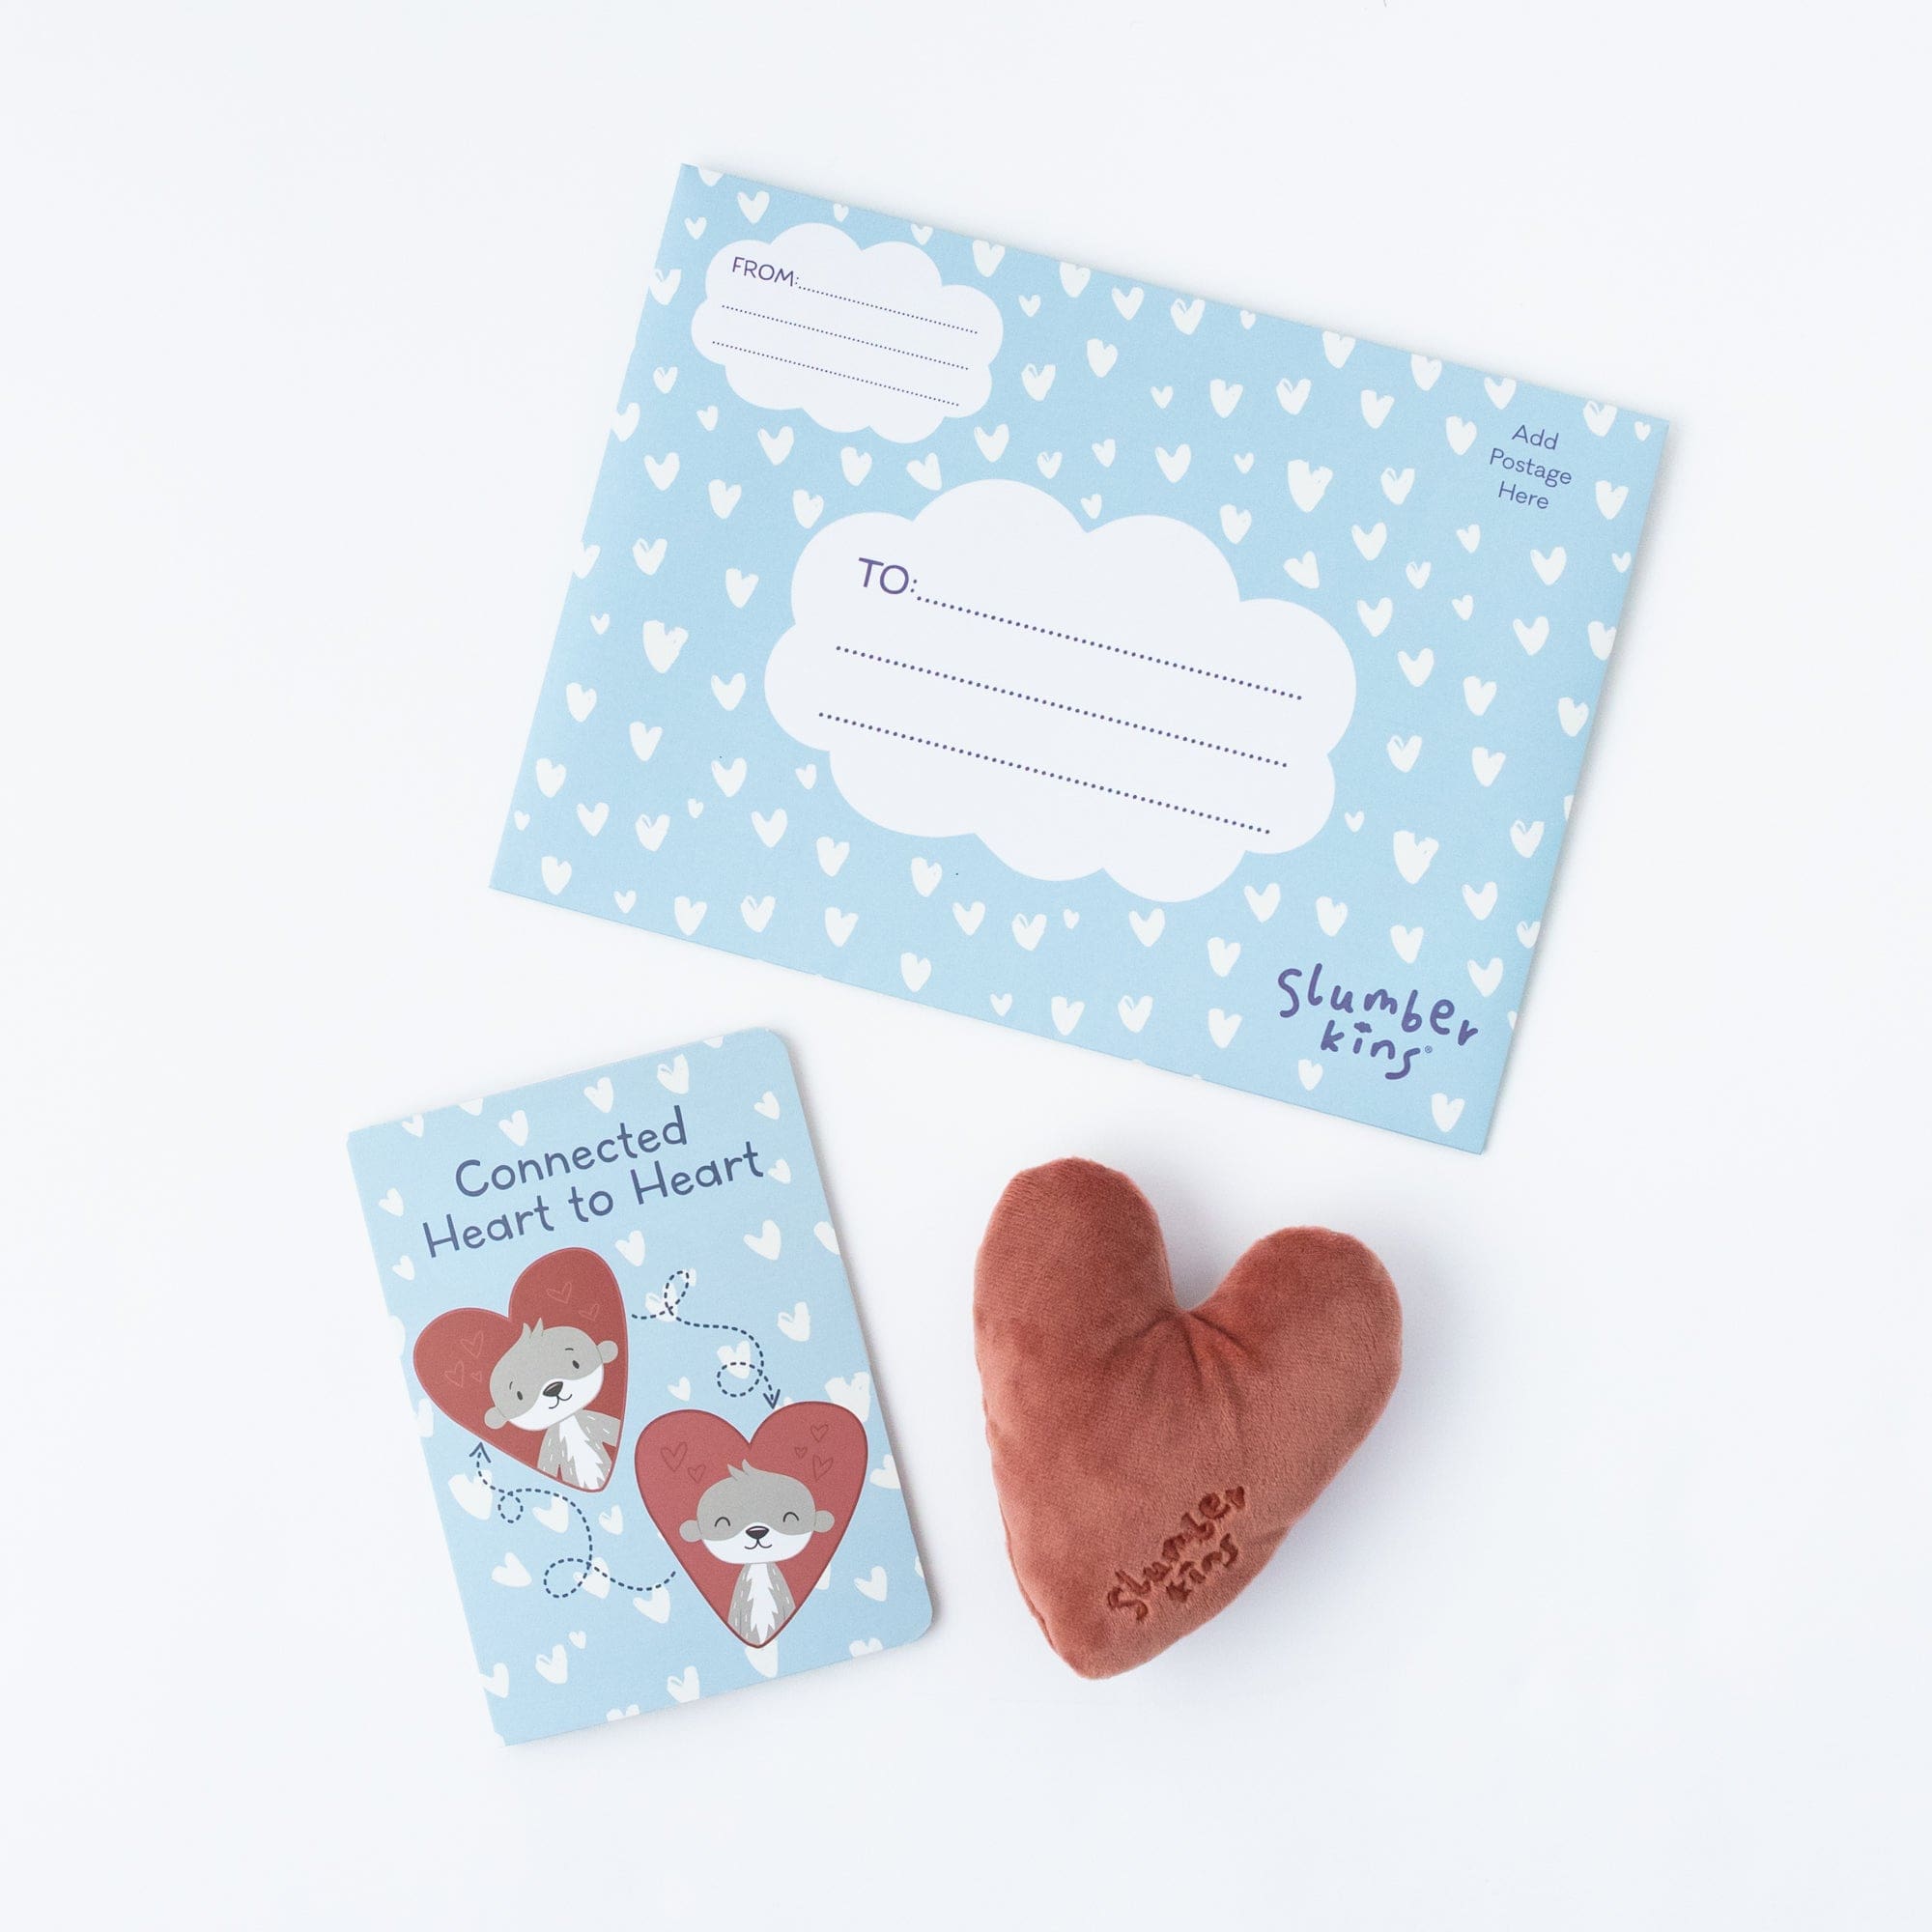 Connected Heart to Heart Kit - View Product